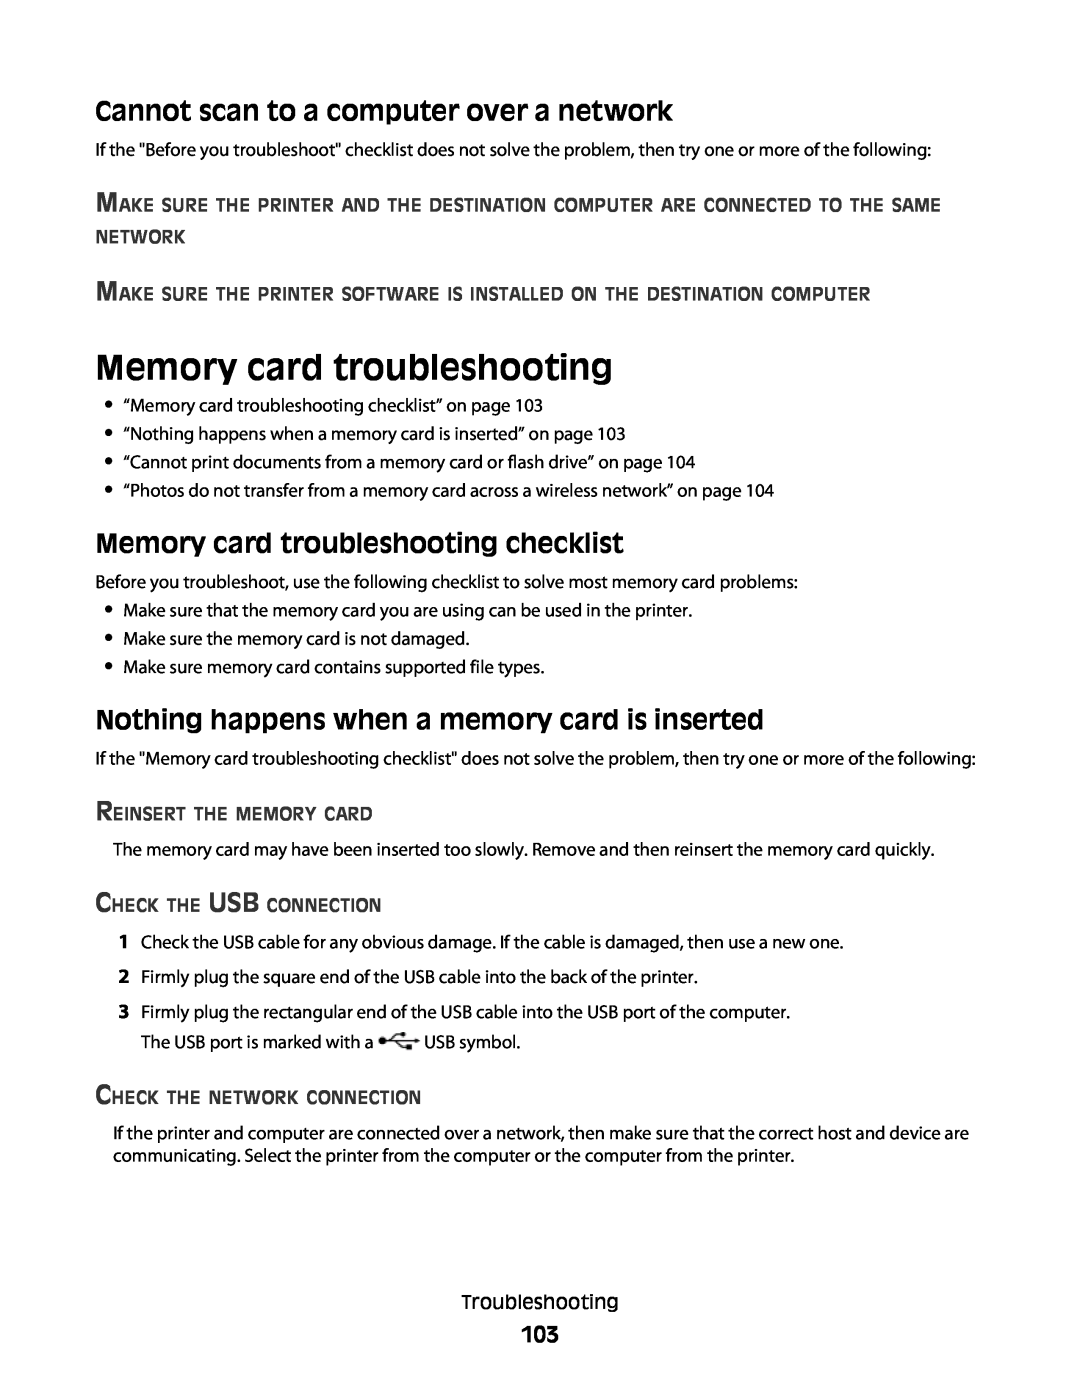 Lexmark 30E Cannot scan to a computer over a network, Memory card troubleshooting checklist, Reinsert The Memory Card 